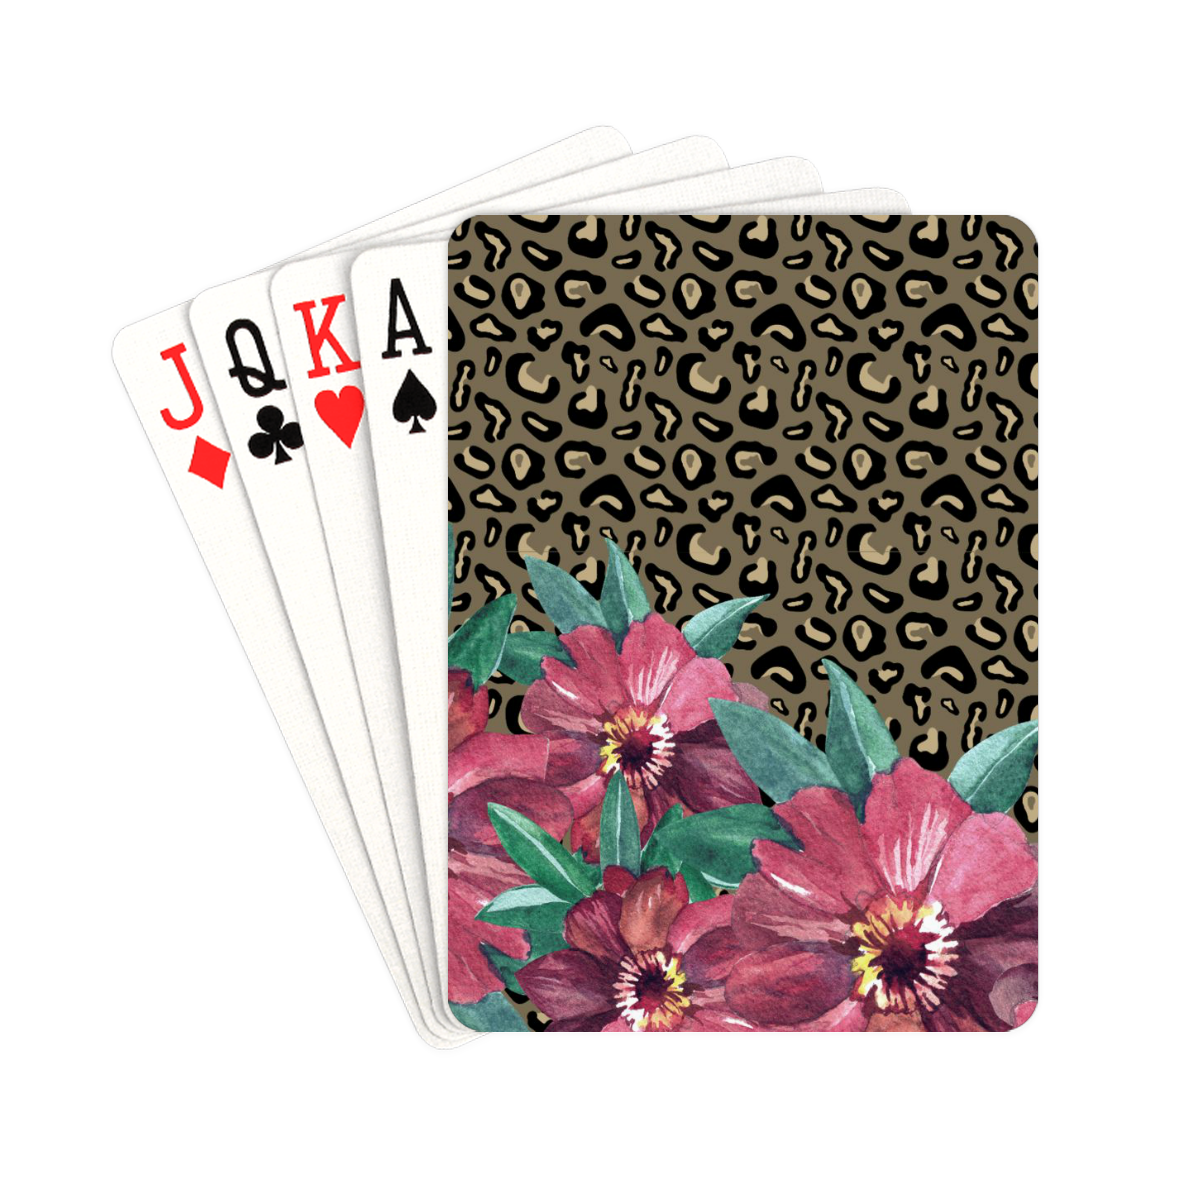 Watercolor Flowers on Cheetah Playing Cards 2.5"x3.5"